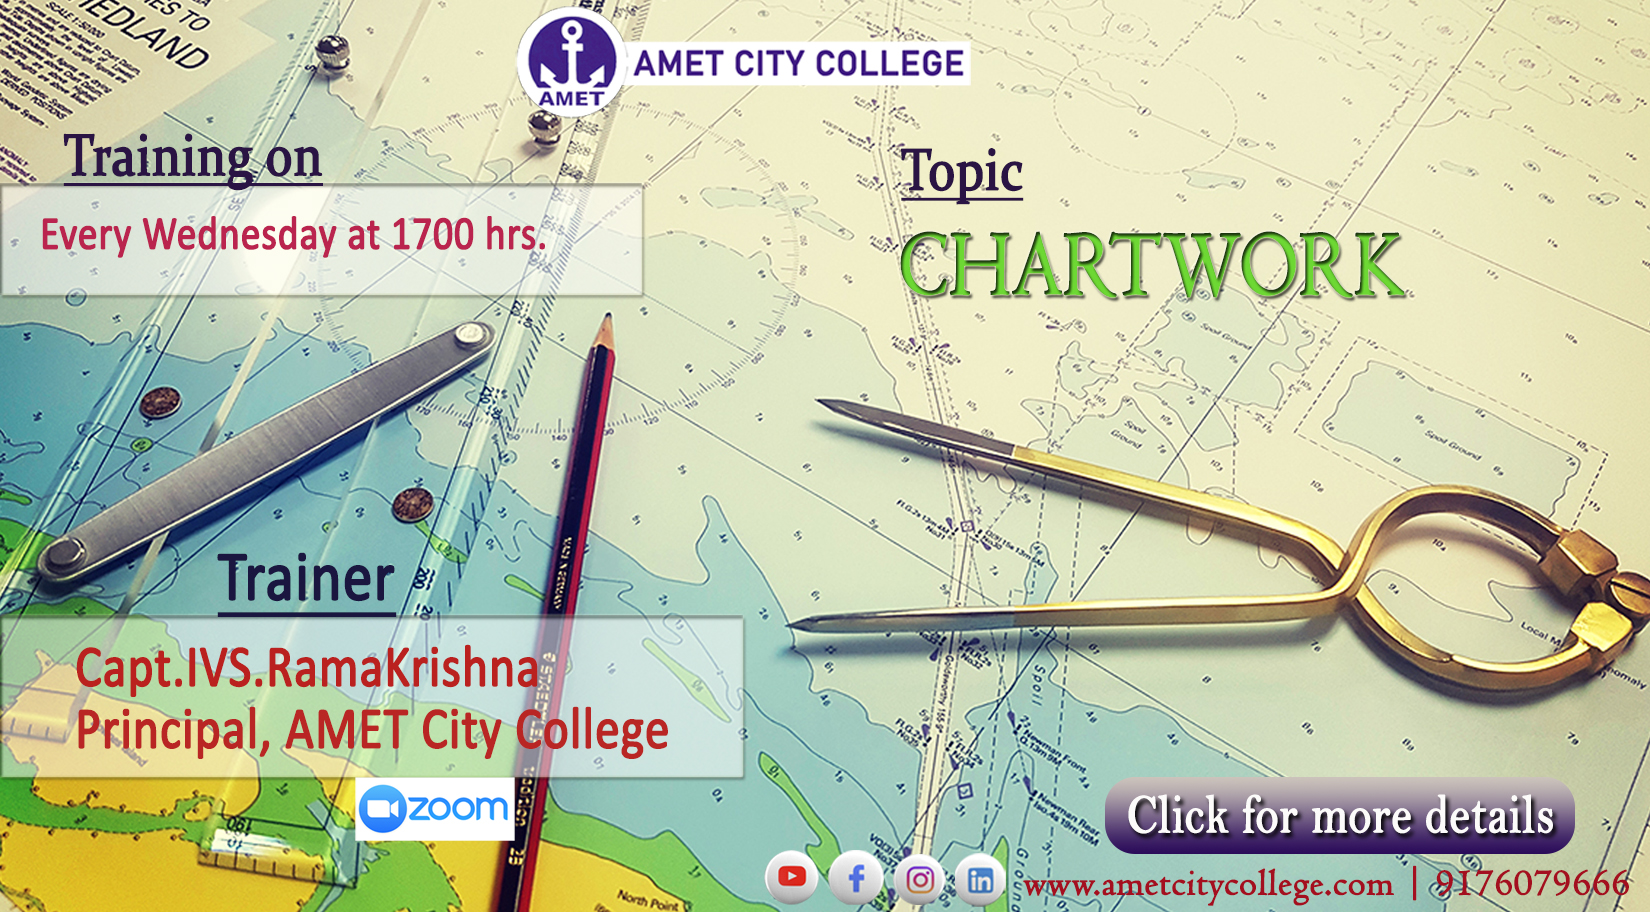 ametcitycollege